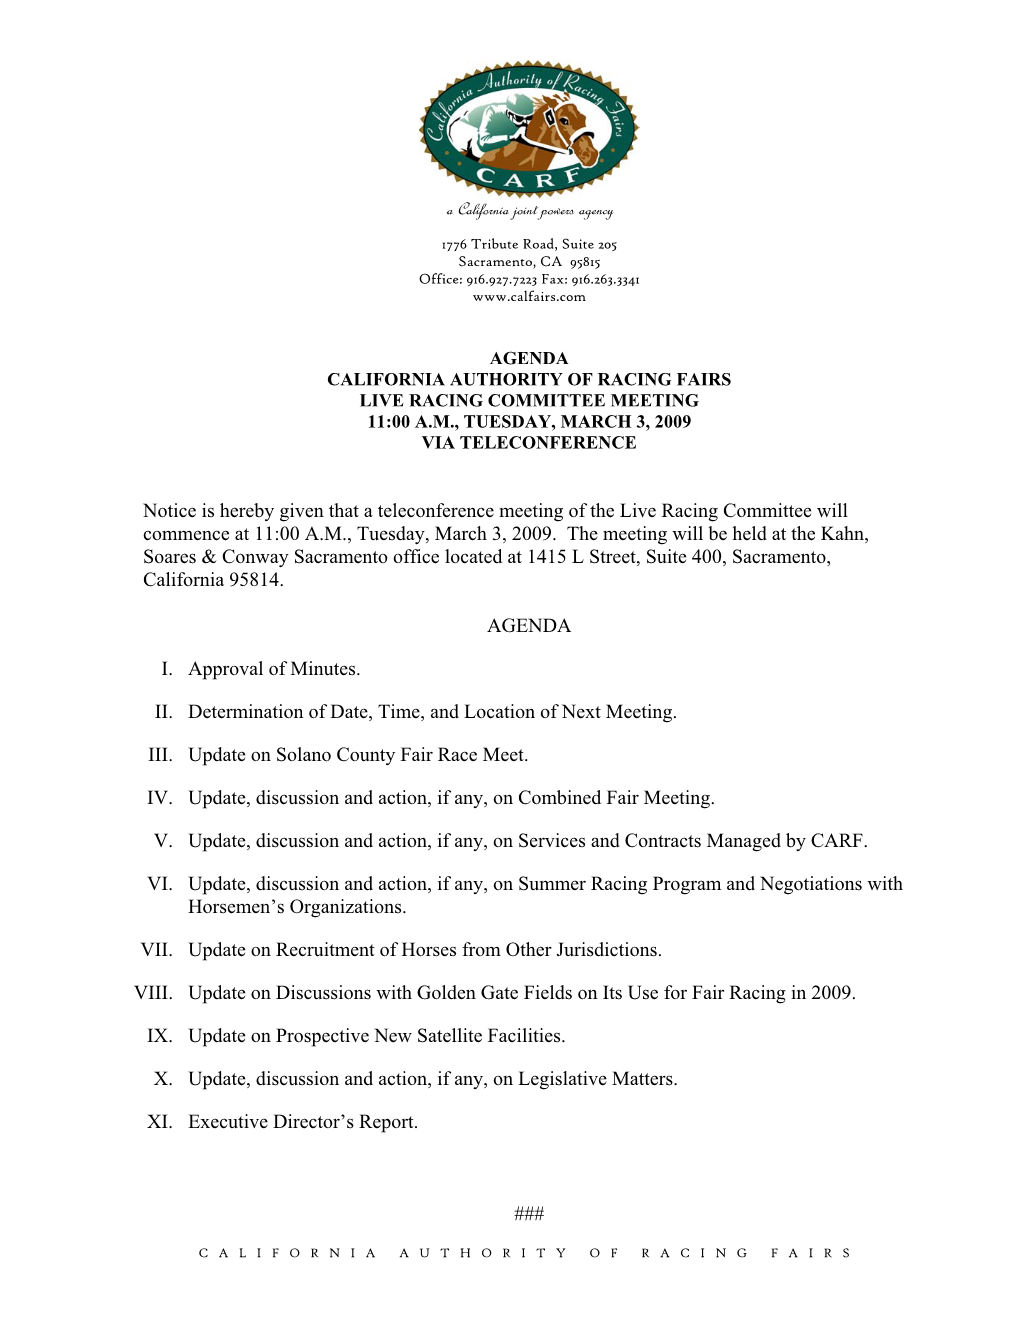 Notice Is Hereby Given That a Teleconference Meeting of the Live Racing Committee Will Commence at 11:00 A.M., Tuesday, March 3, 2009